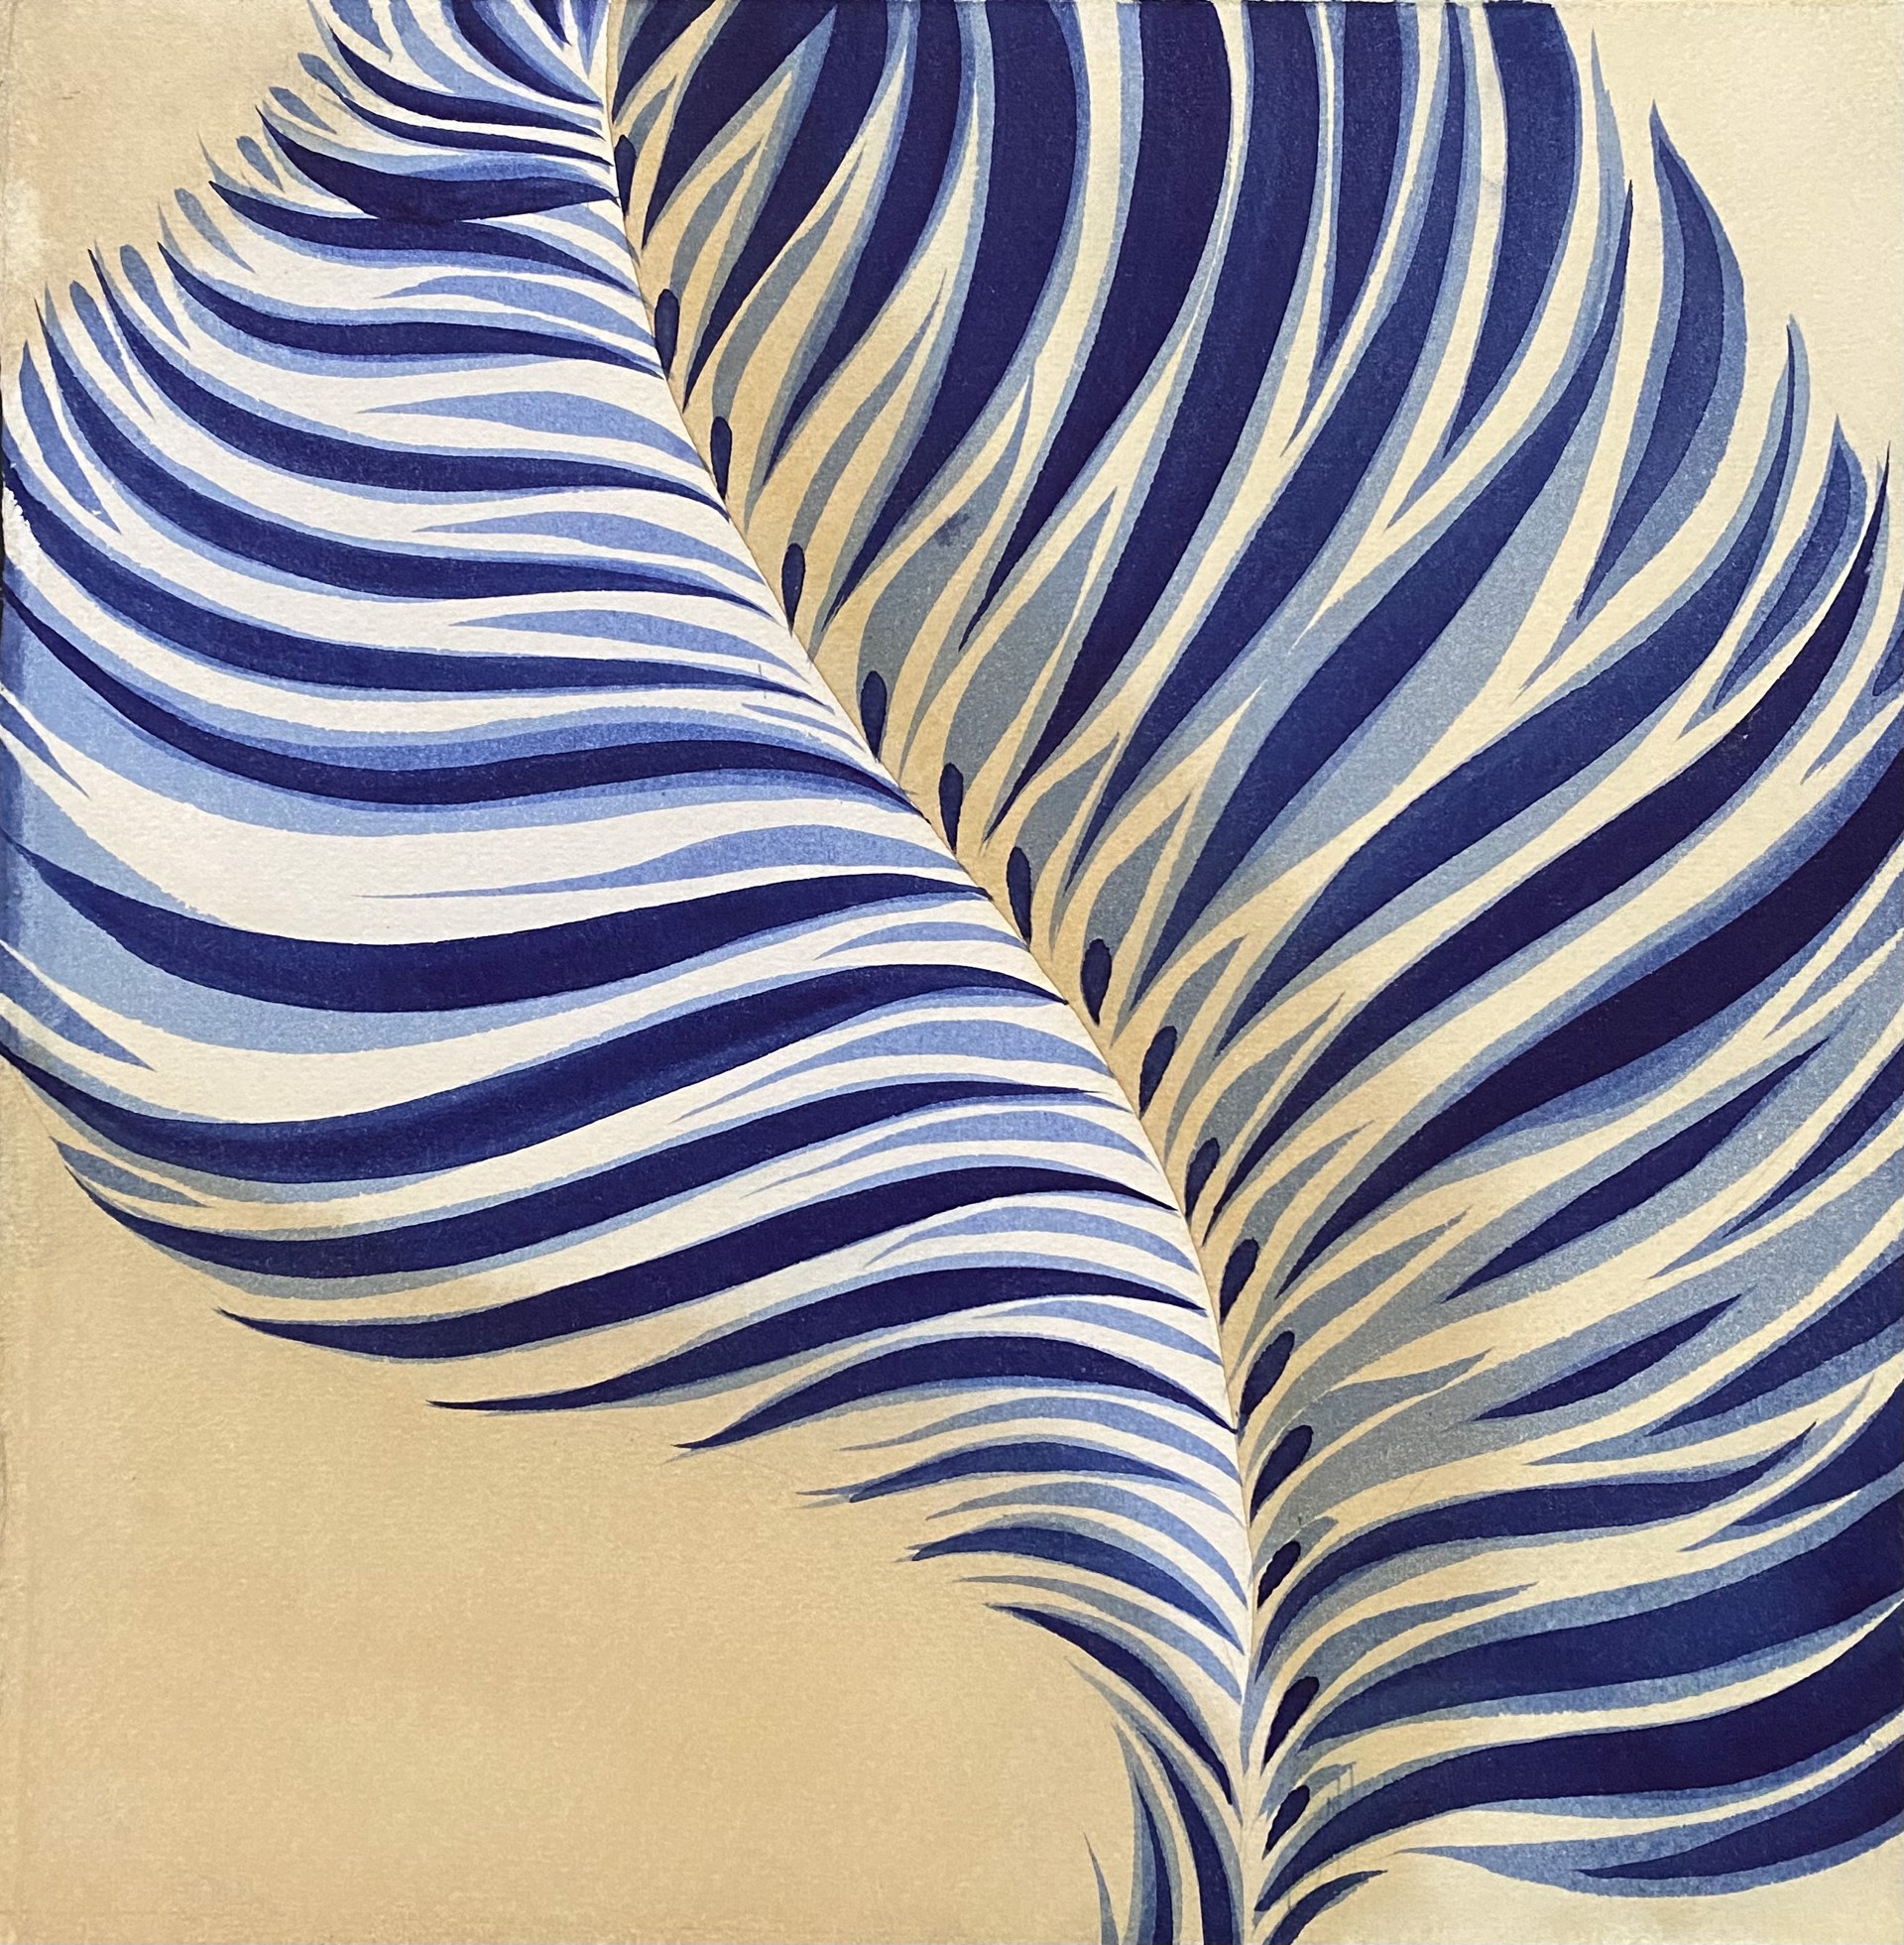 Untitled (Blue Feather) by Jan Heaton